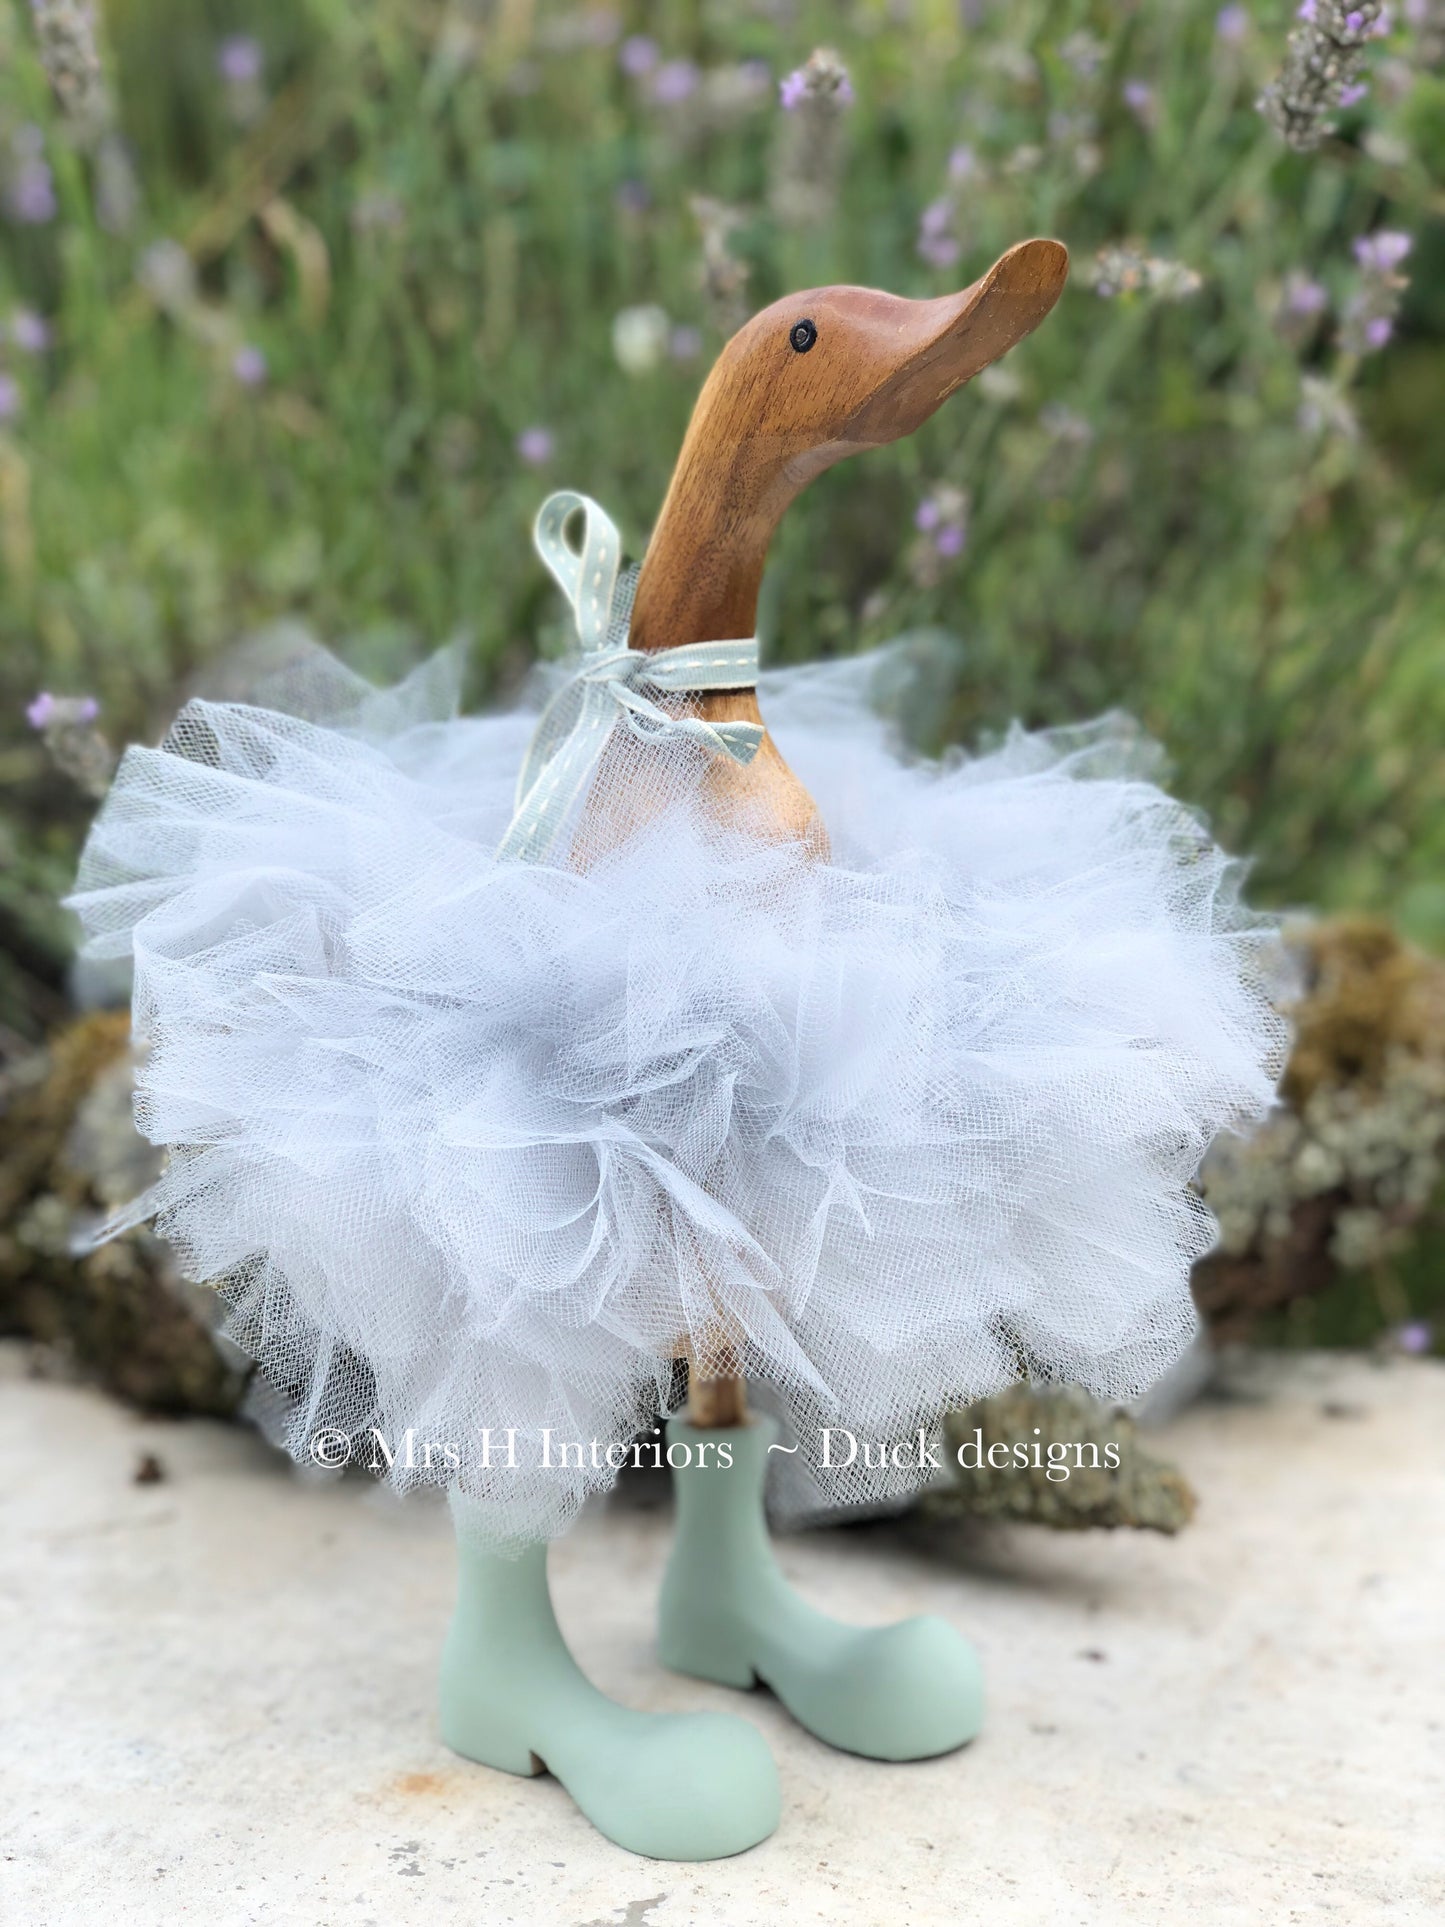 Grey Tutu Duck with Duck Egg Blue Boots - Decorated Wooden Duck in Boots by Mrs H the Duck Lady